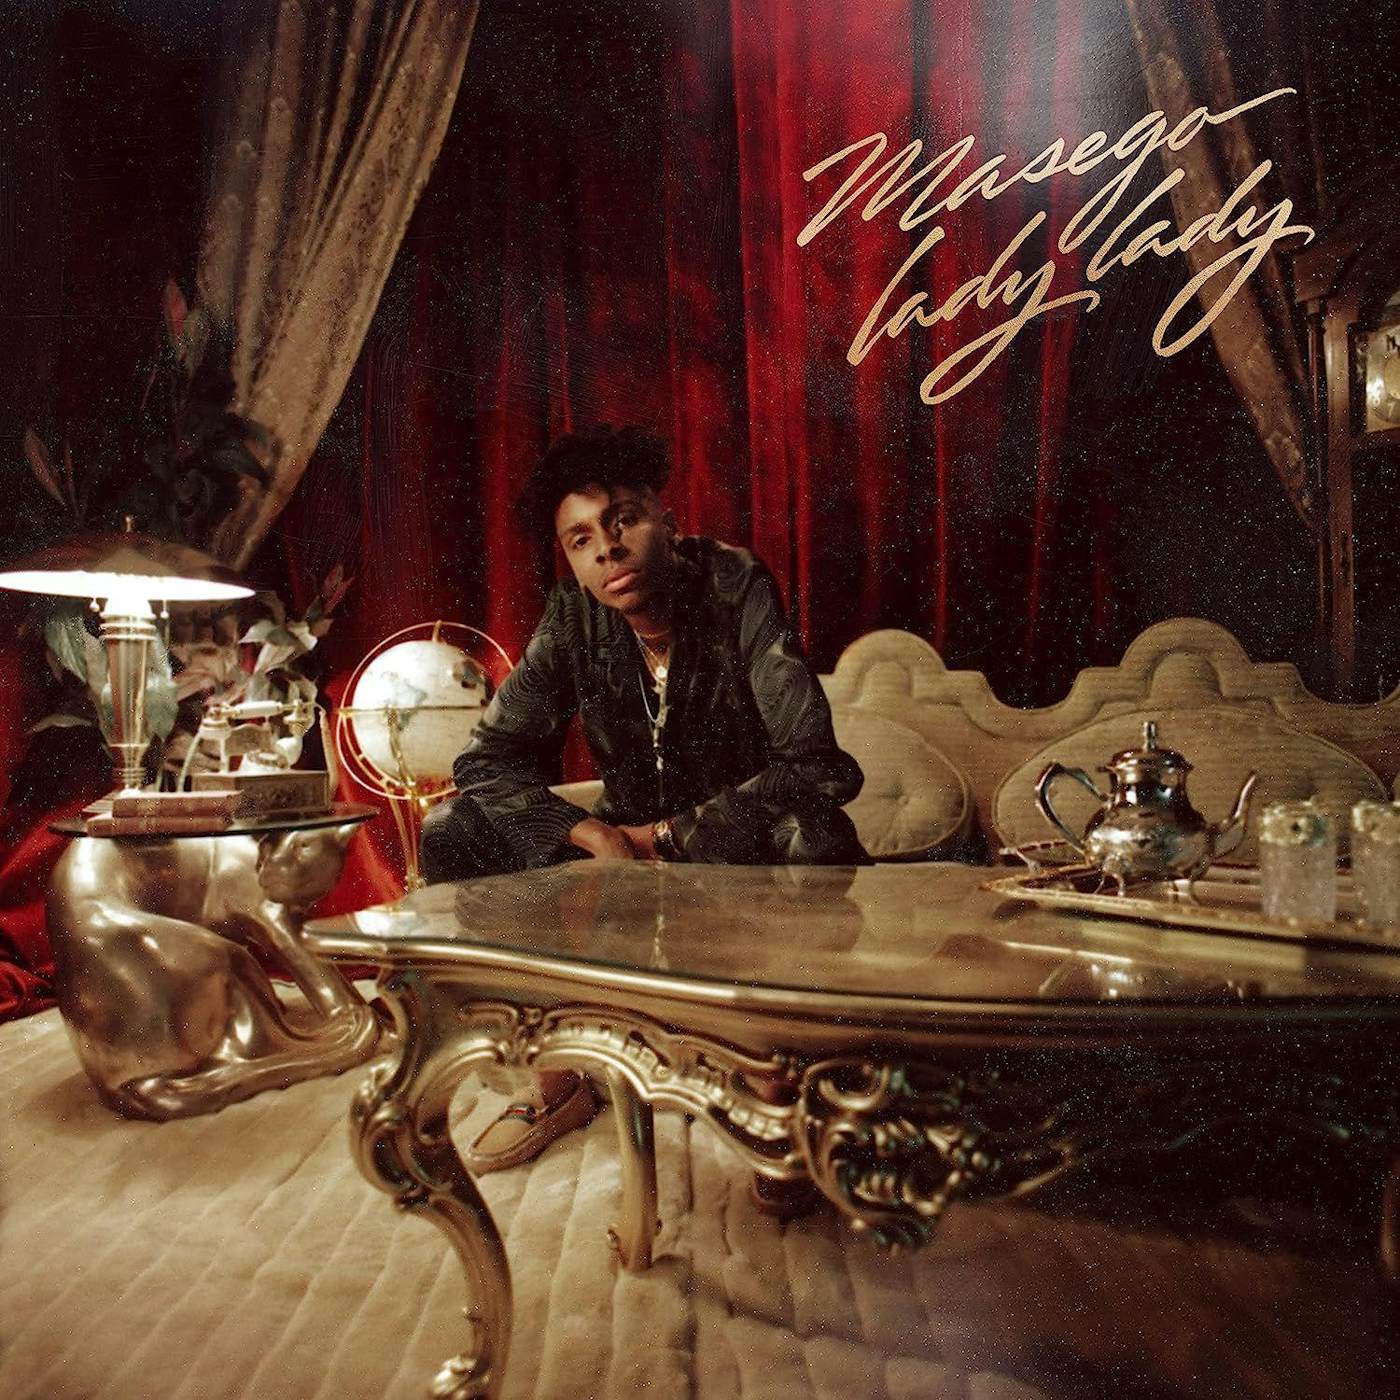 Lady Lady - CD – Masego Official Store